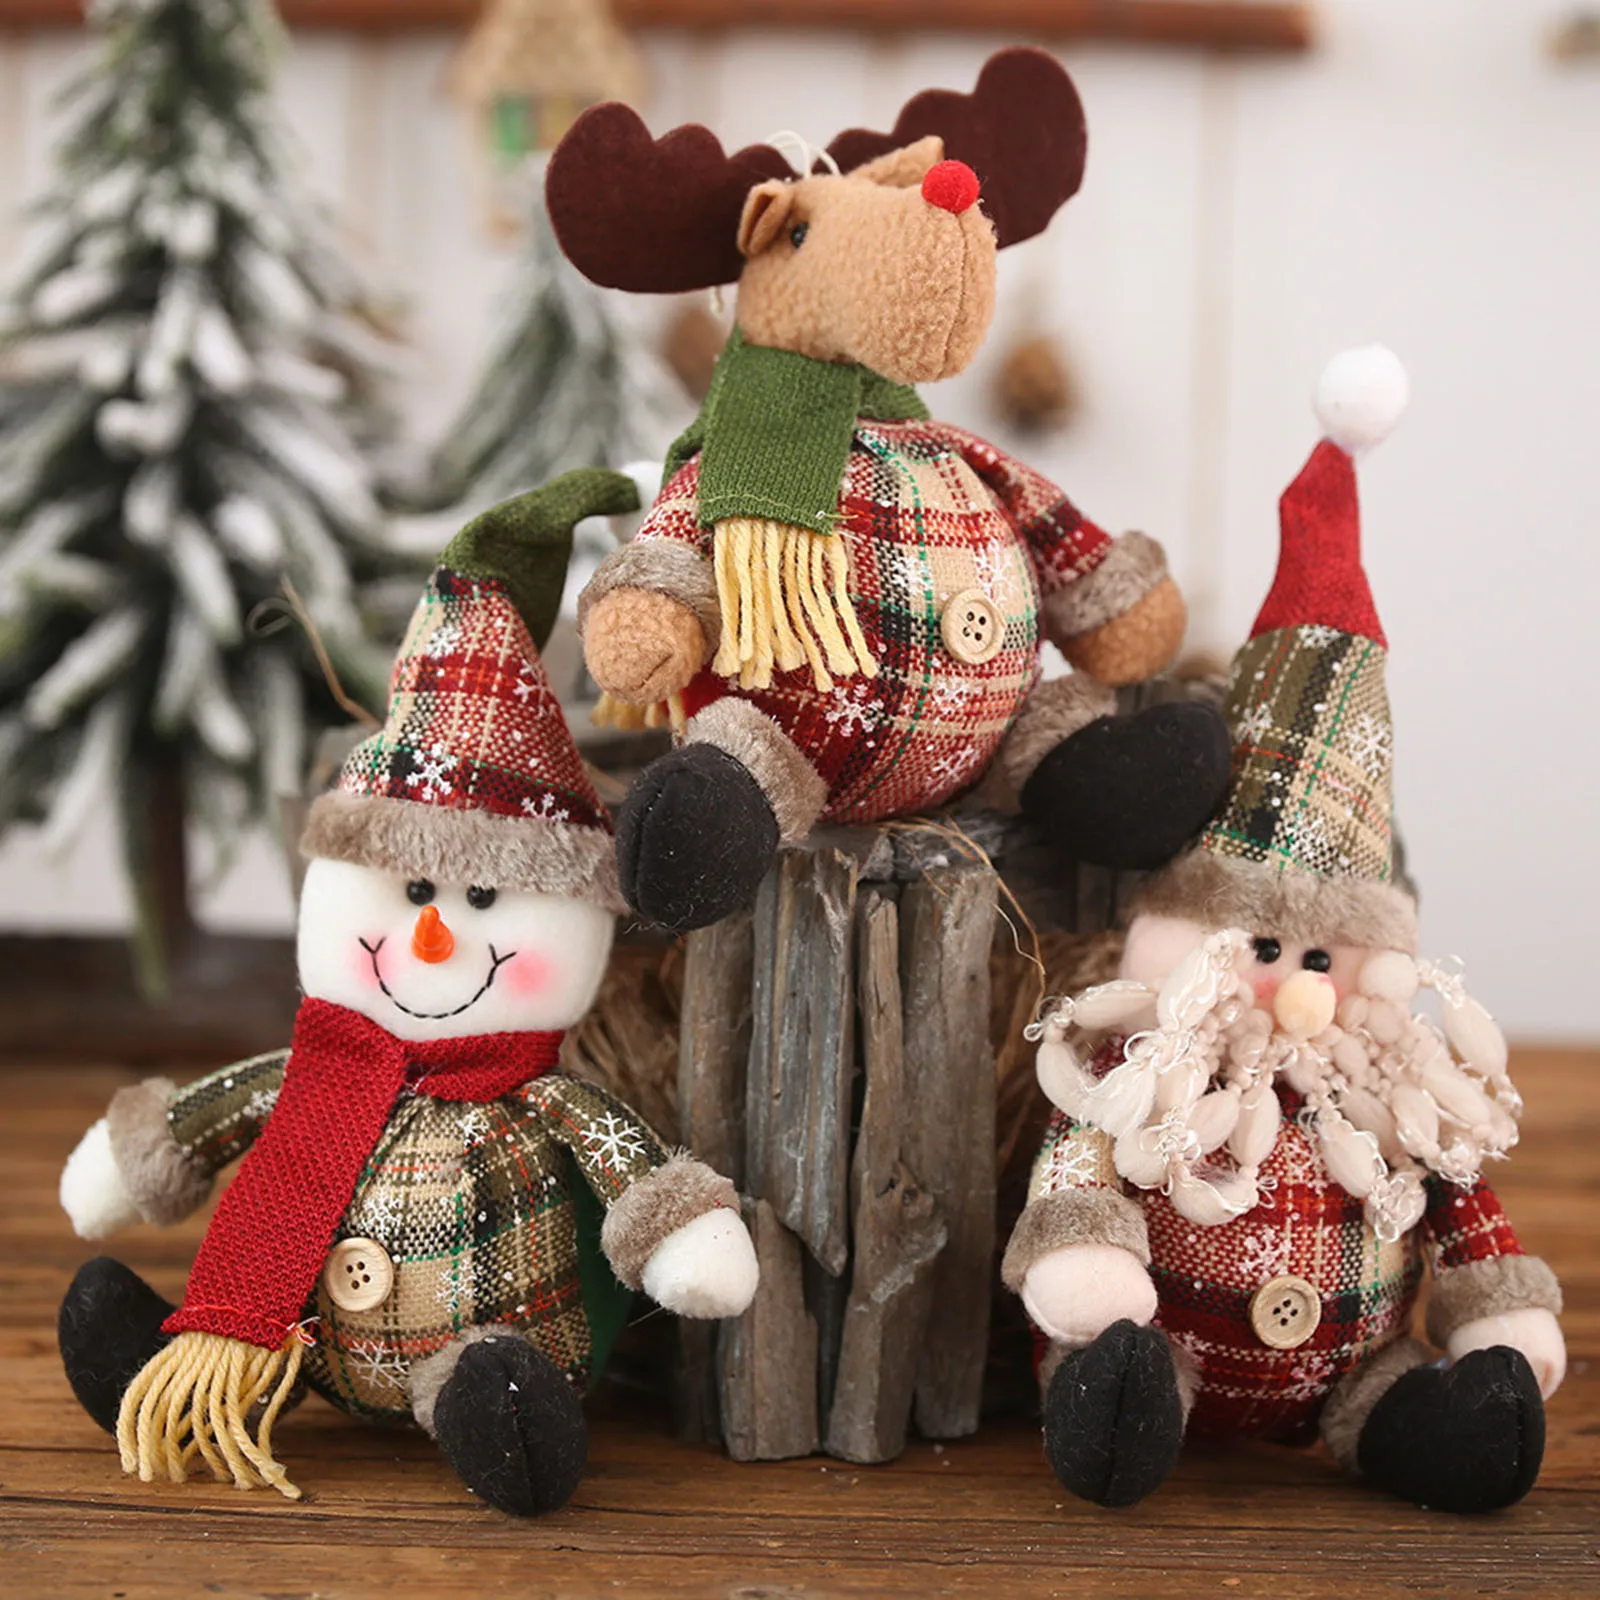 Xmas Hanging Doll Santa Clause Snowman Reindeer Plush Ornaments 3D Christmas Ornaments for Stocking Ball Bell Fireplace